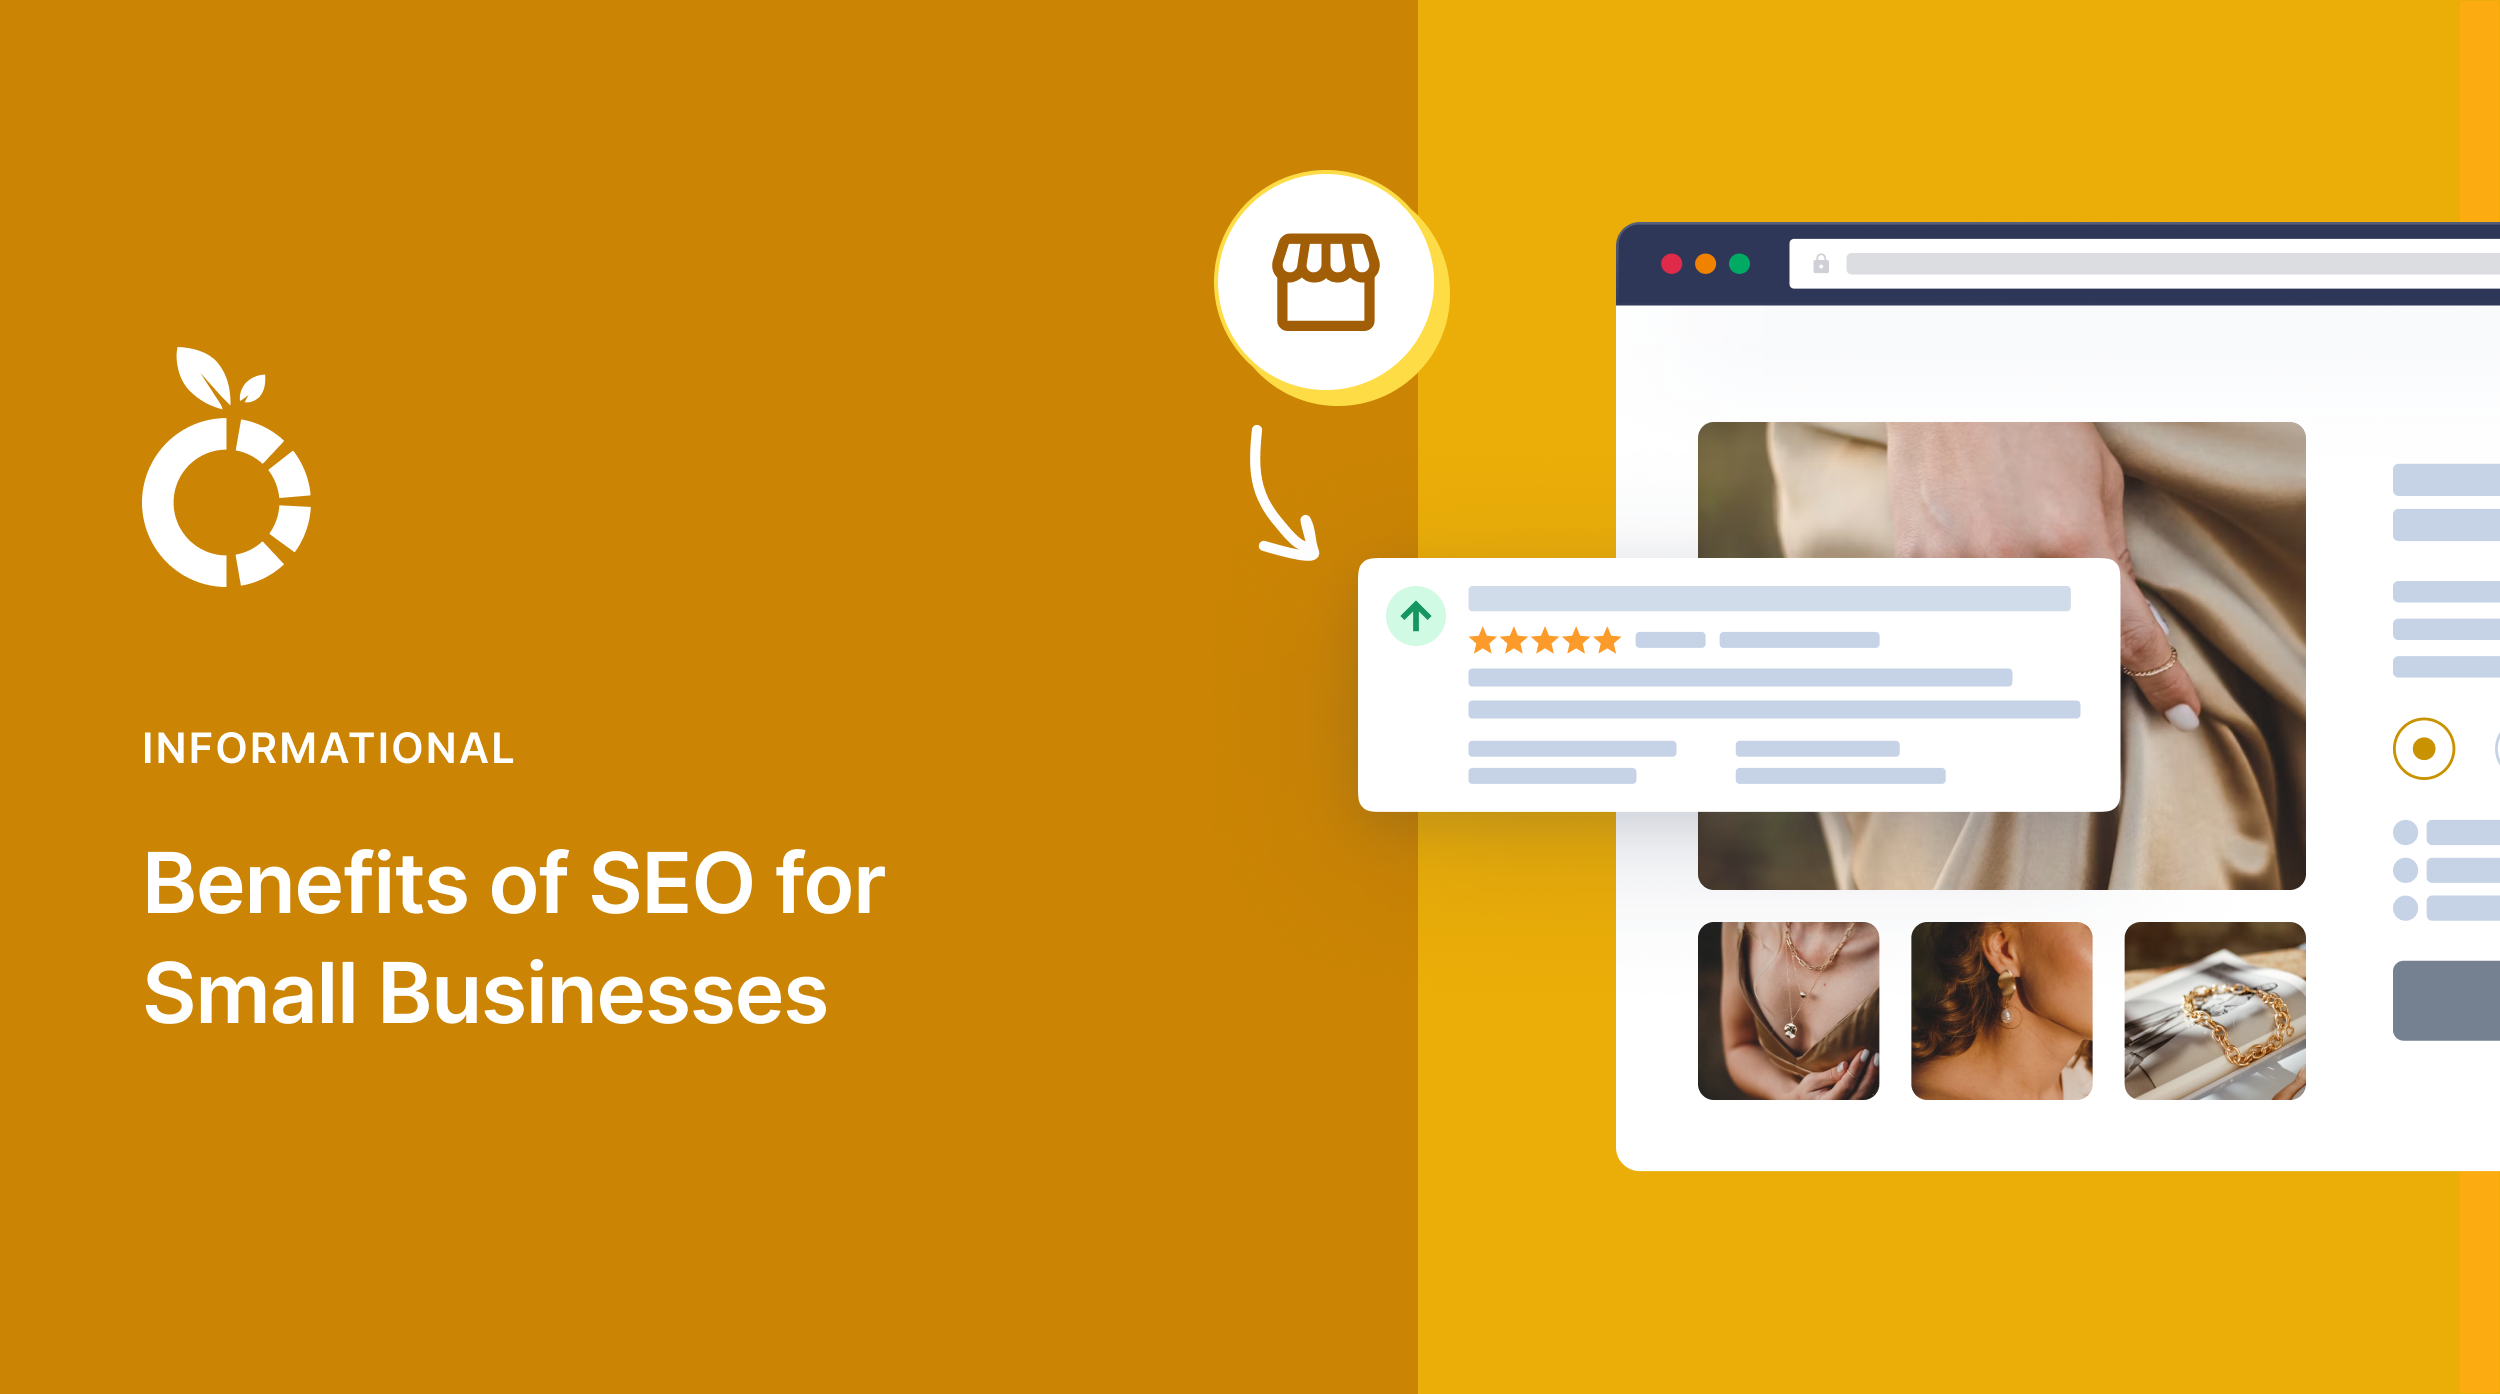 Benefits of SEO for small businesses.